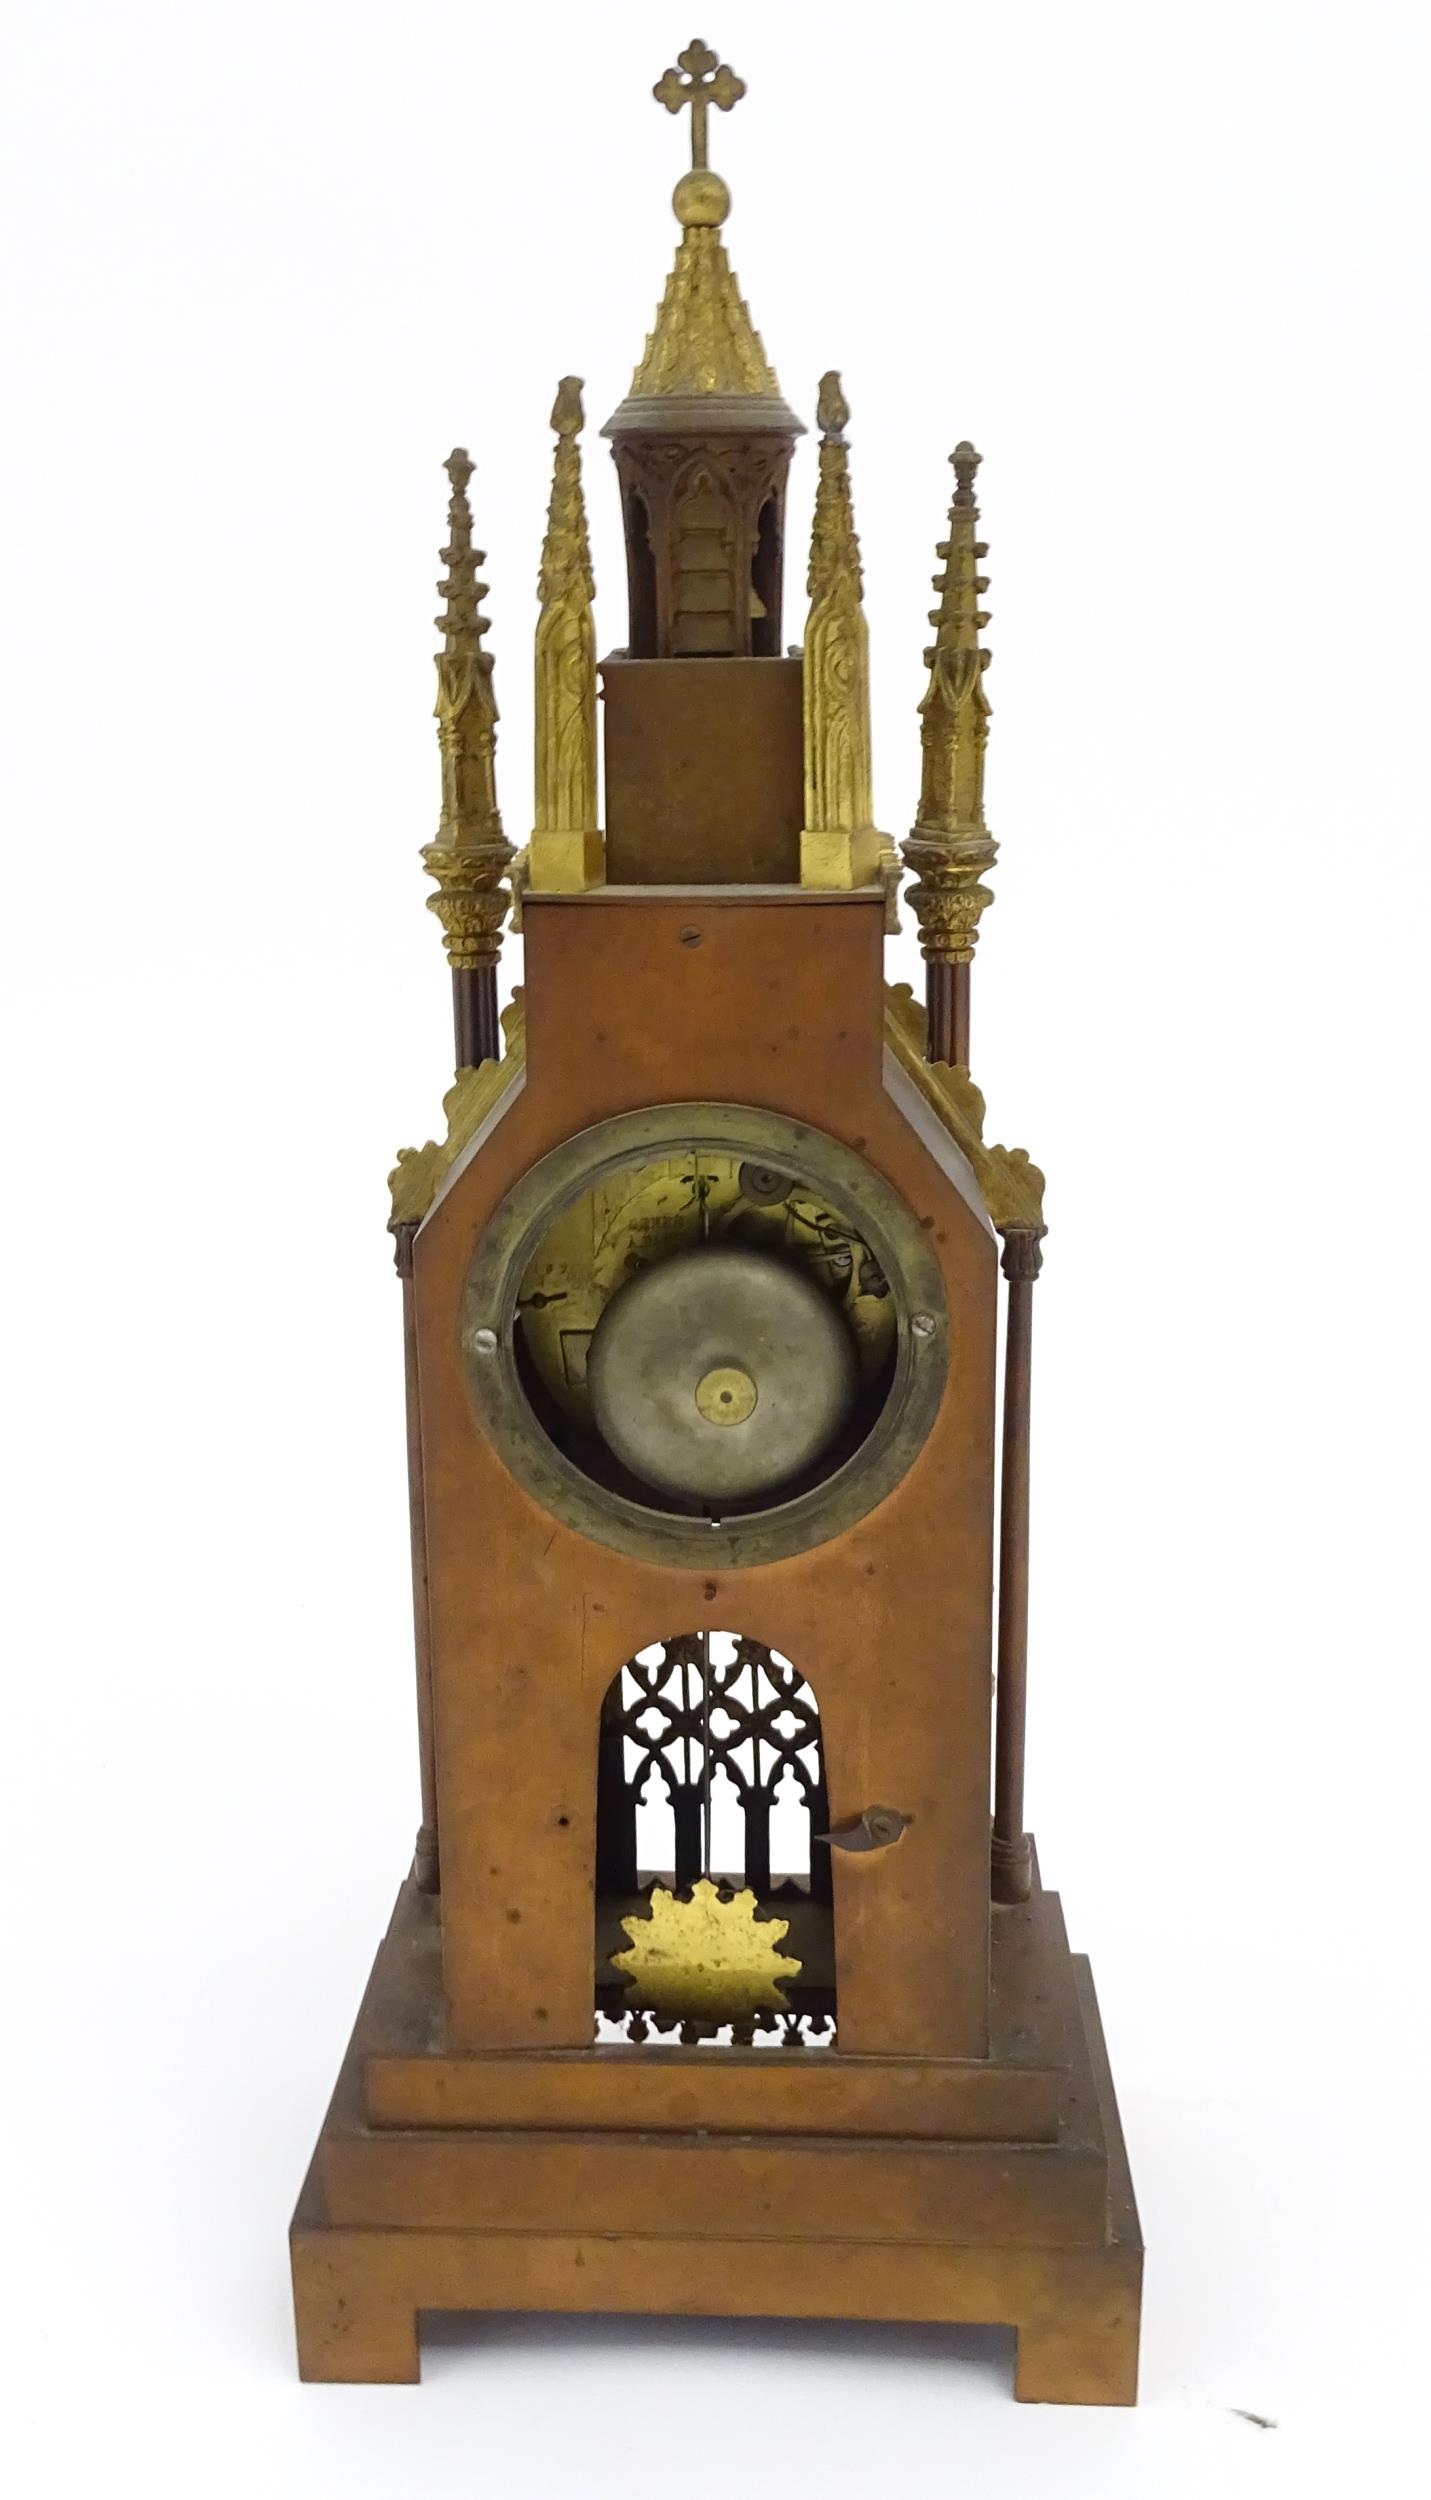 A French cathedral clock of gothic architectural design with ormolu mounts, having pointed finials - Image 13 of 16